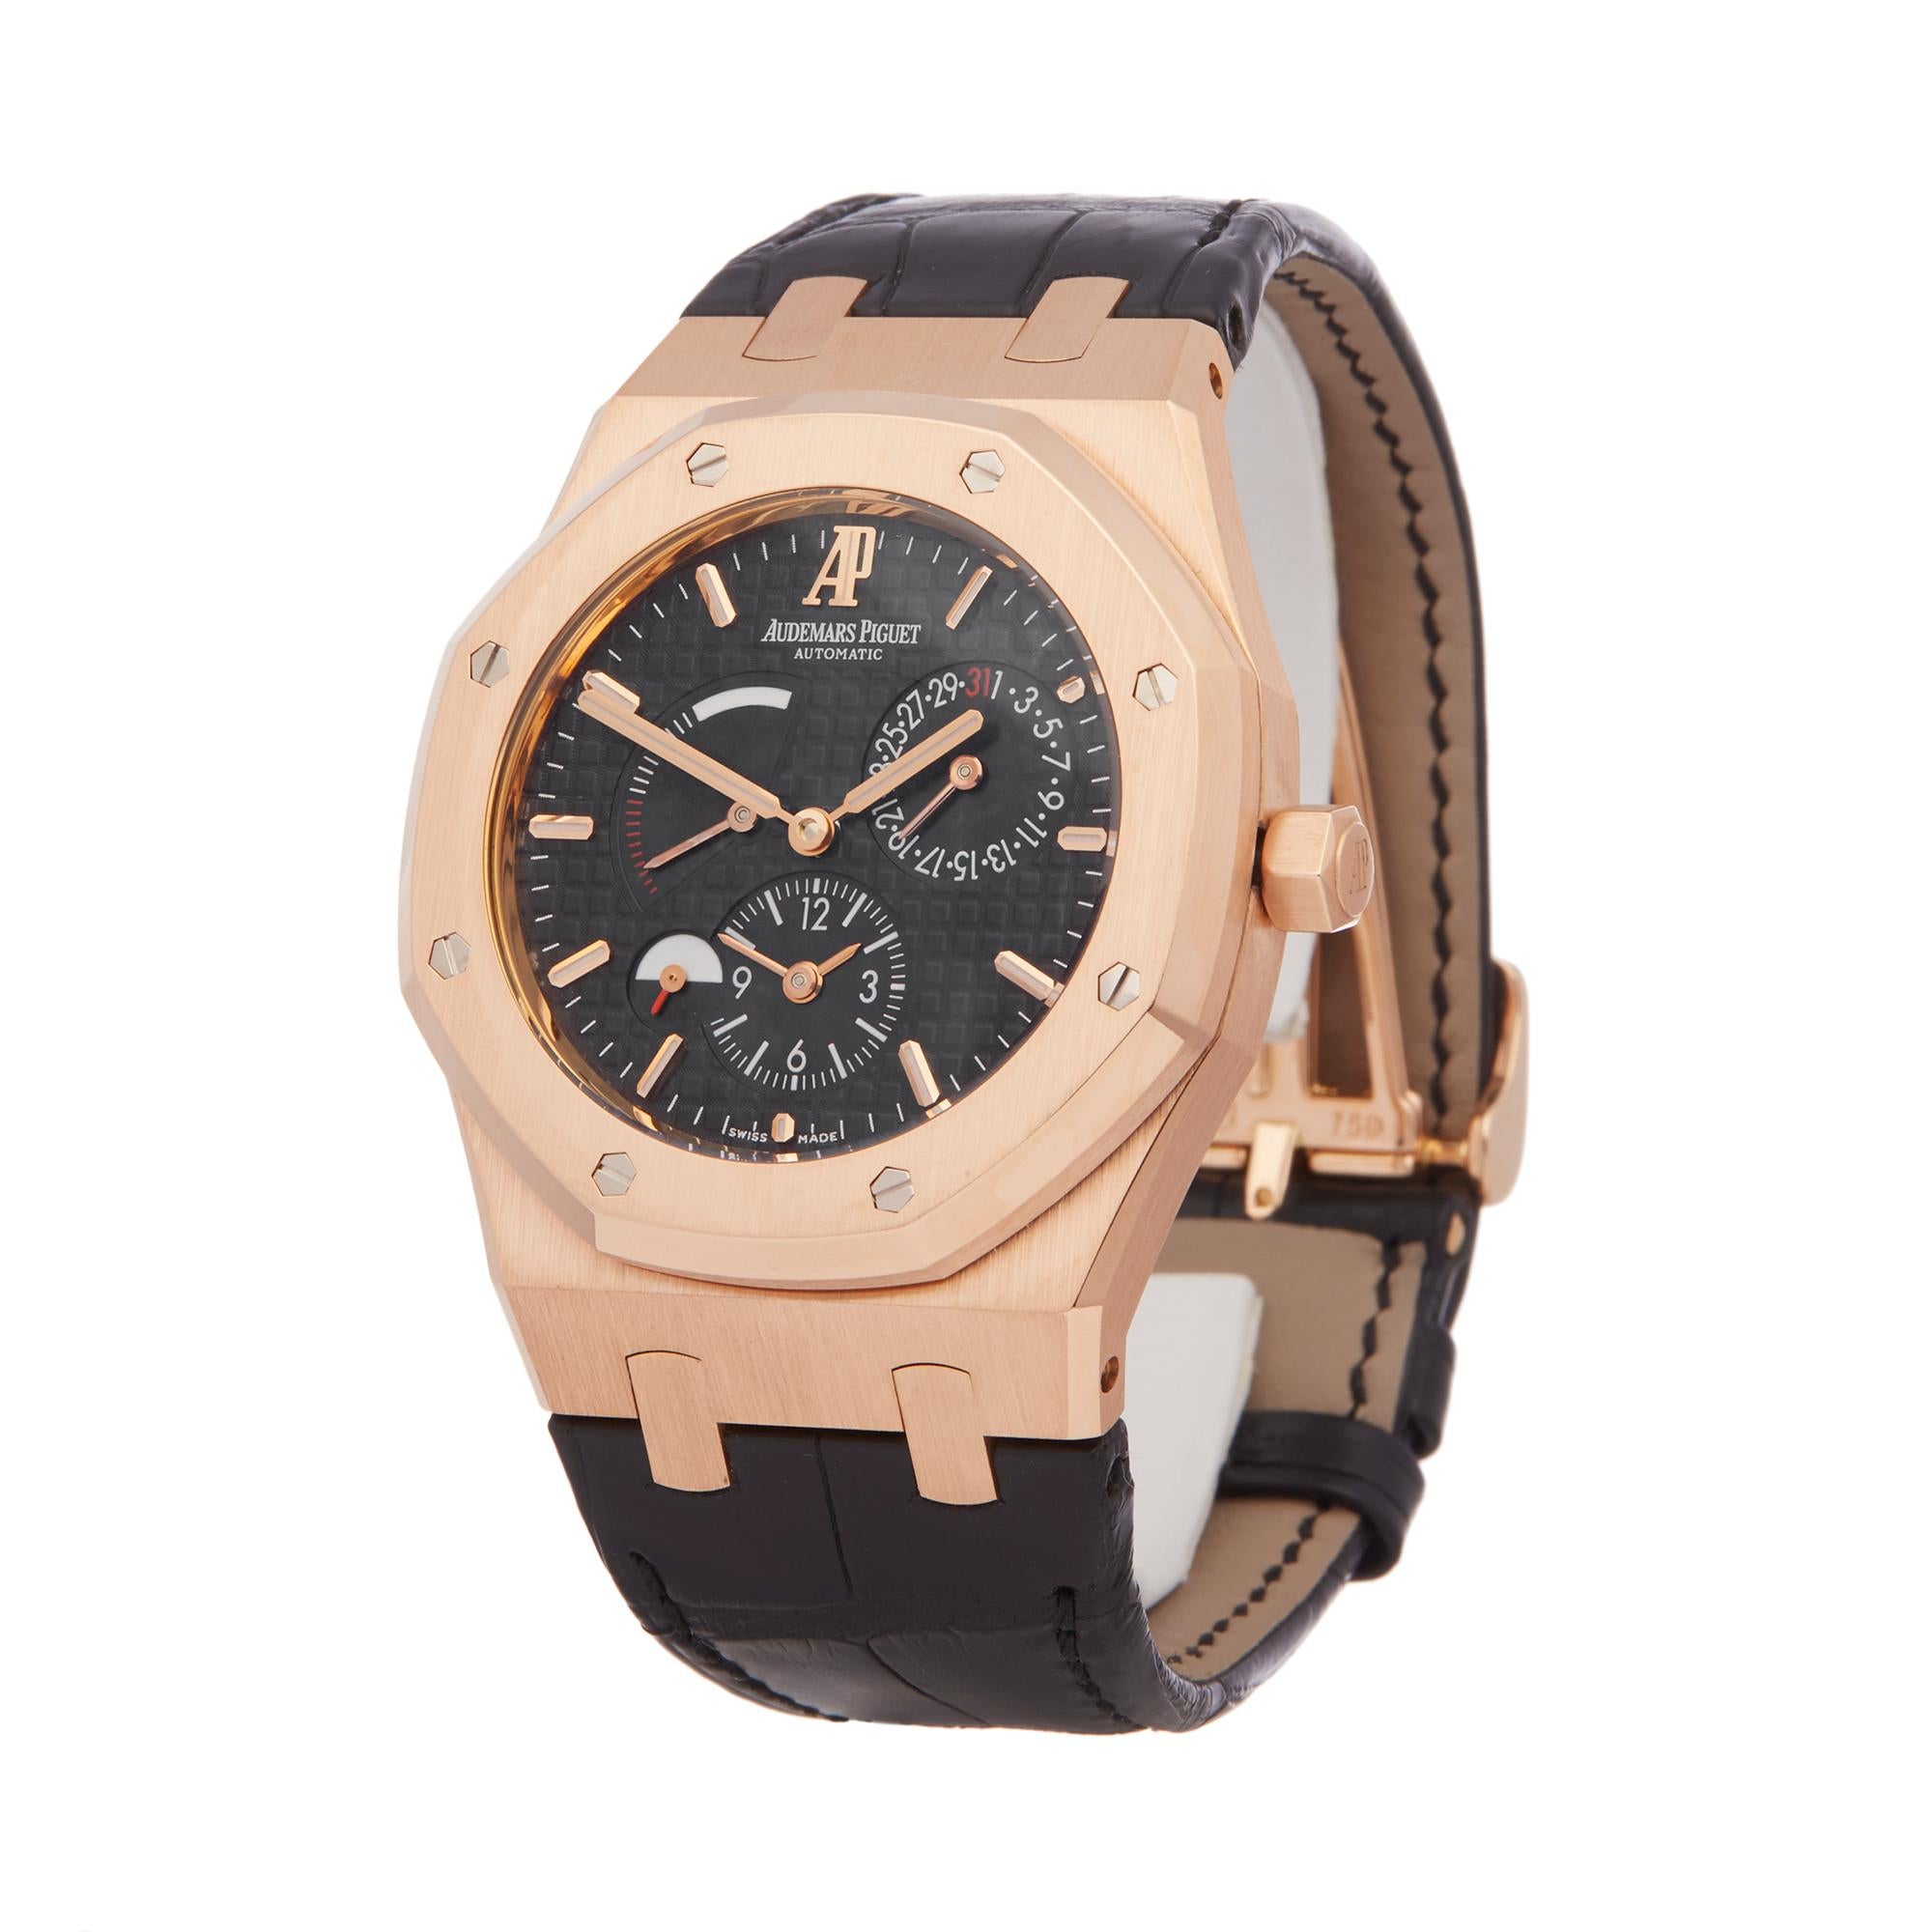 Ref: W5844
Manufacturer: Audemars Piguet
Model: Royal Oak
Model Ref: 26120OR.00.D002CR.01
Age: 12st November 2010
Gender: Mens
Complete With: Box & Guarantee Only
Dial: Black Baton
Glass: Sapphire Crystal
Movement: Automatic
Water Resistance: To